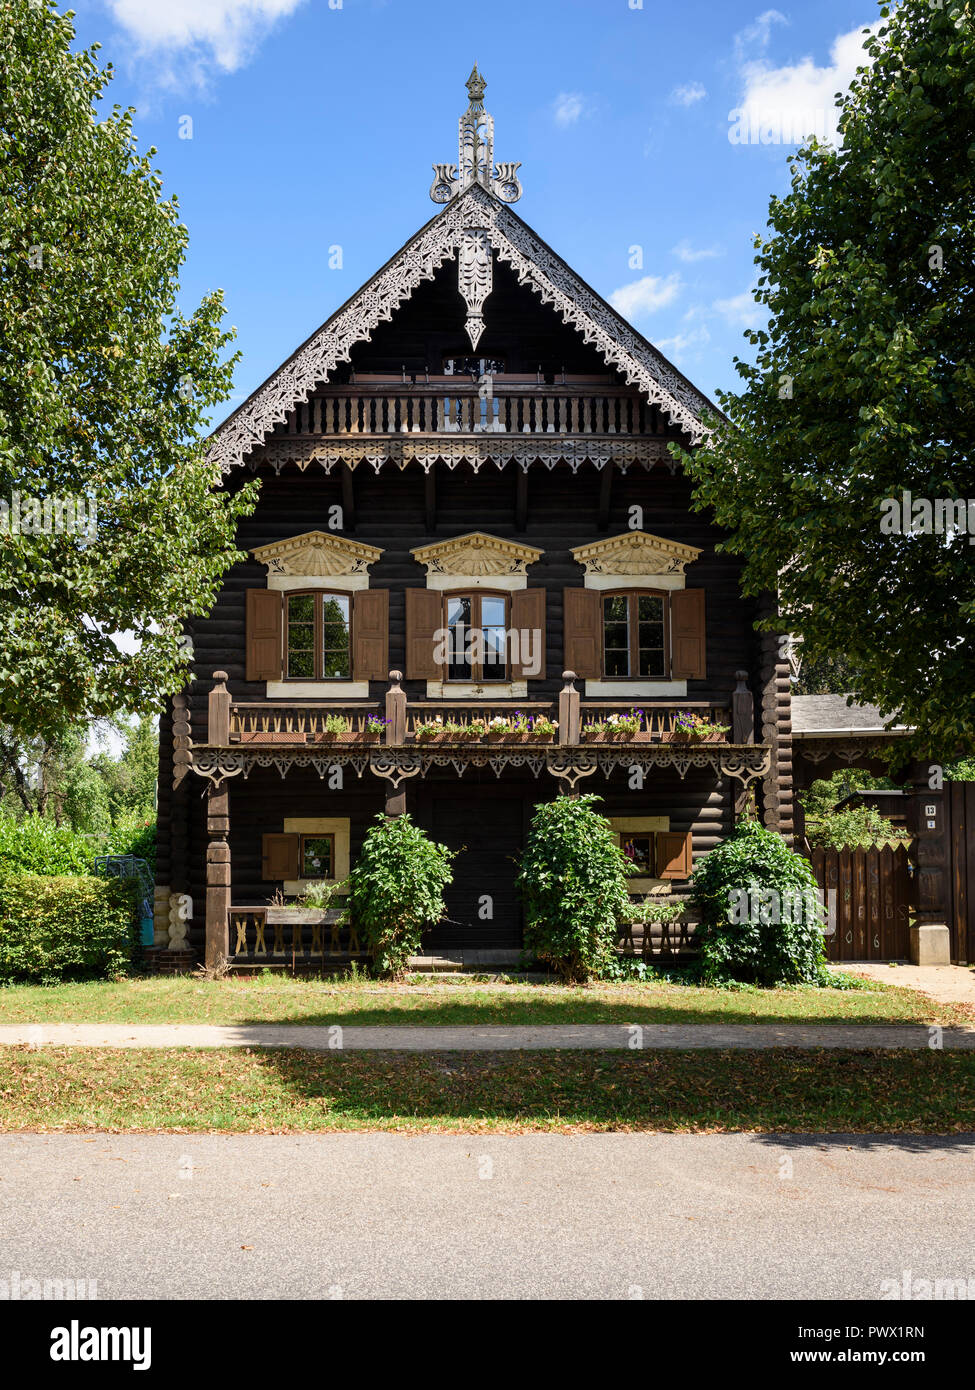 Potsdam. Berlin. Germany. Traditional Russian timber house in the settlement of Alexandrowka, a 19th century Russian colony in Potsdam. House No. 13. Stock Photo